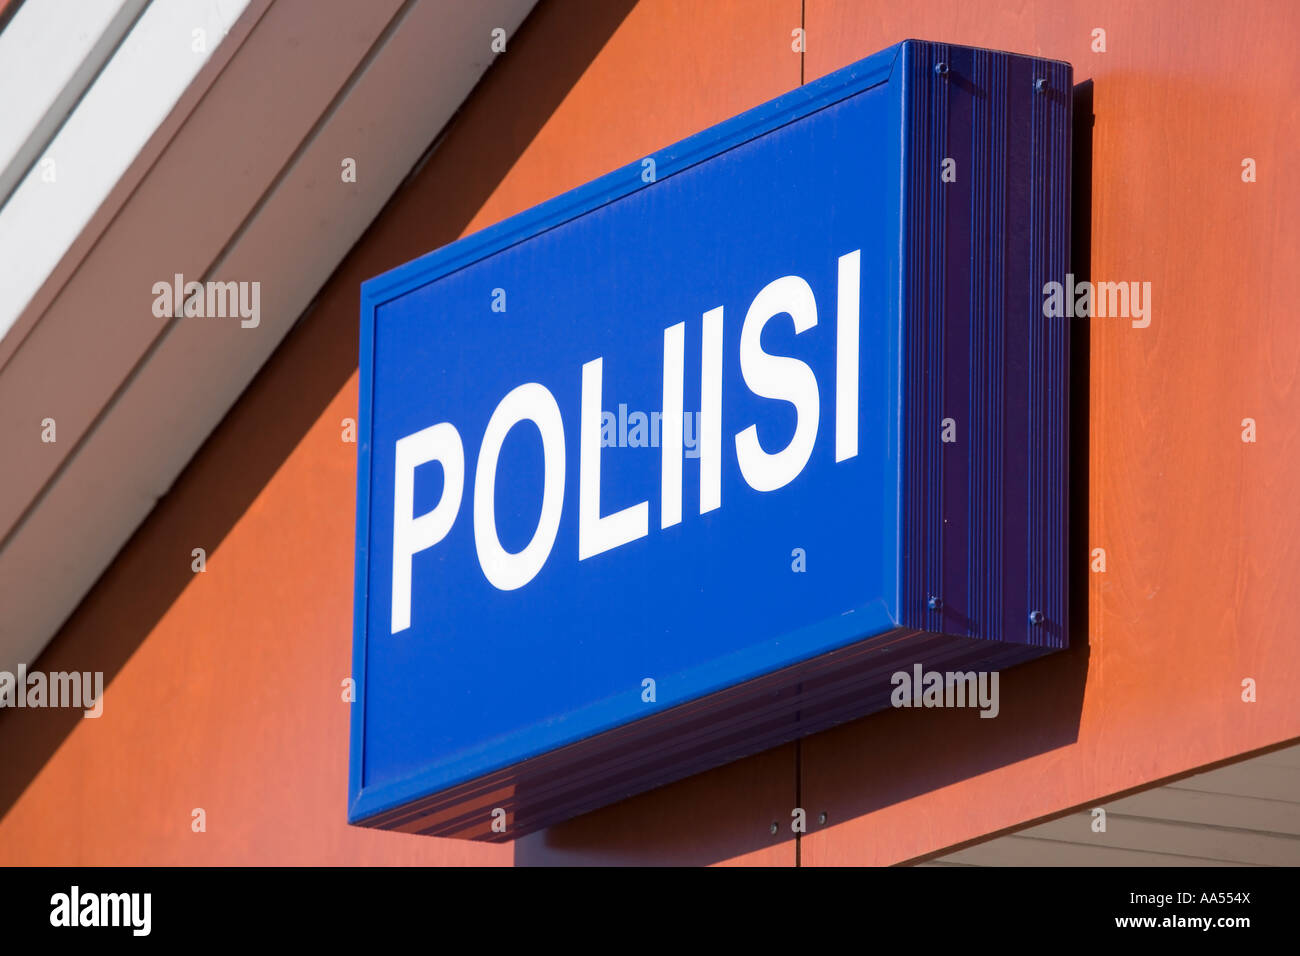 Finnish police sign on building wall, Finland Europe Stock Photo